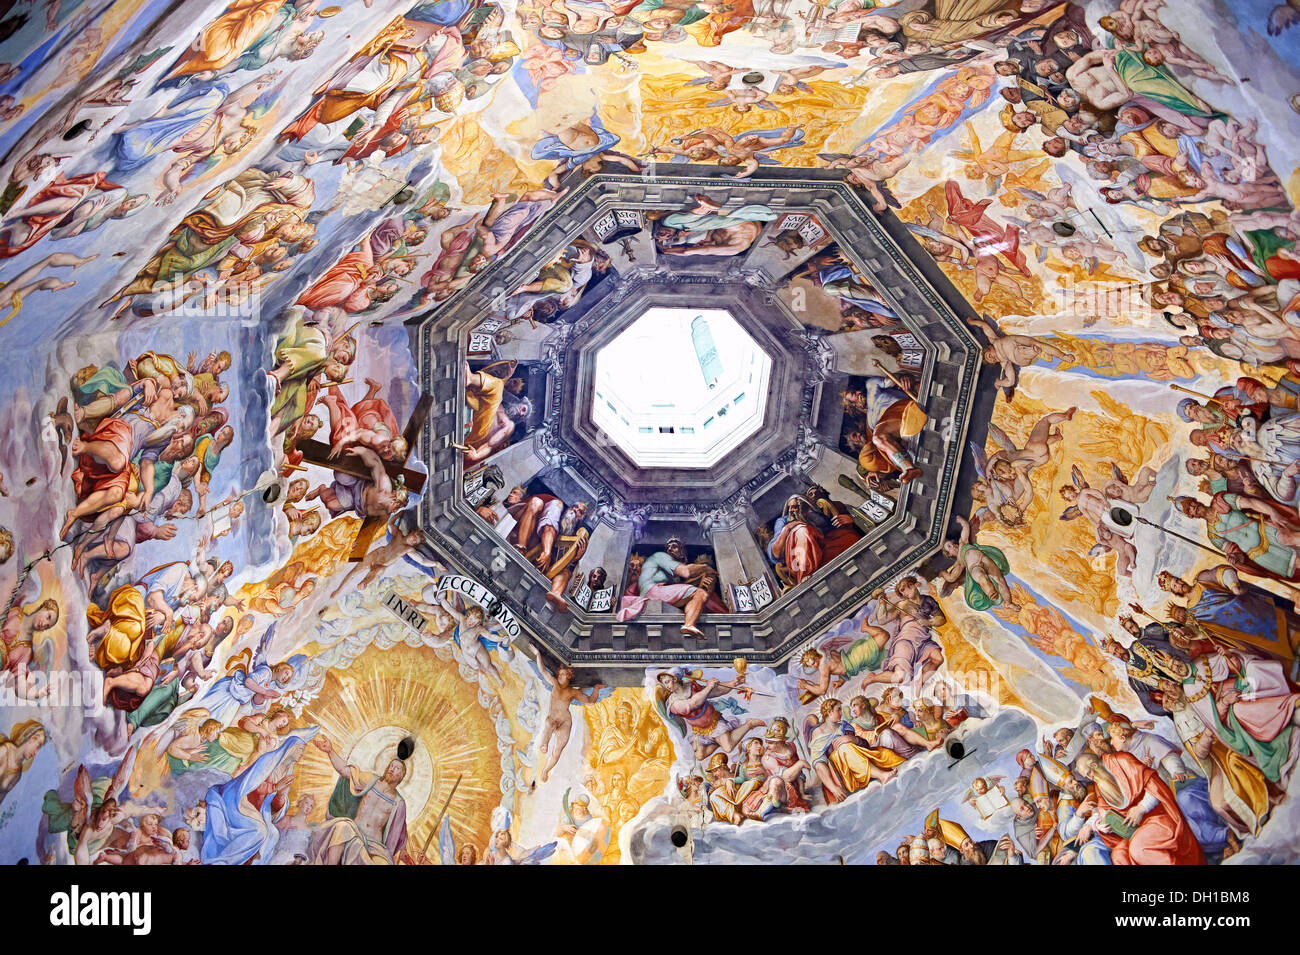 Fresco of the Last Judgement on the dome interior of the Duomo Florence Stock Photo